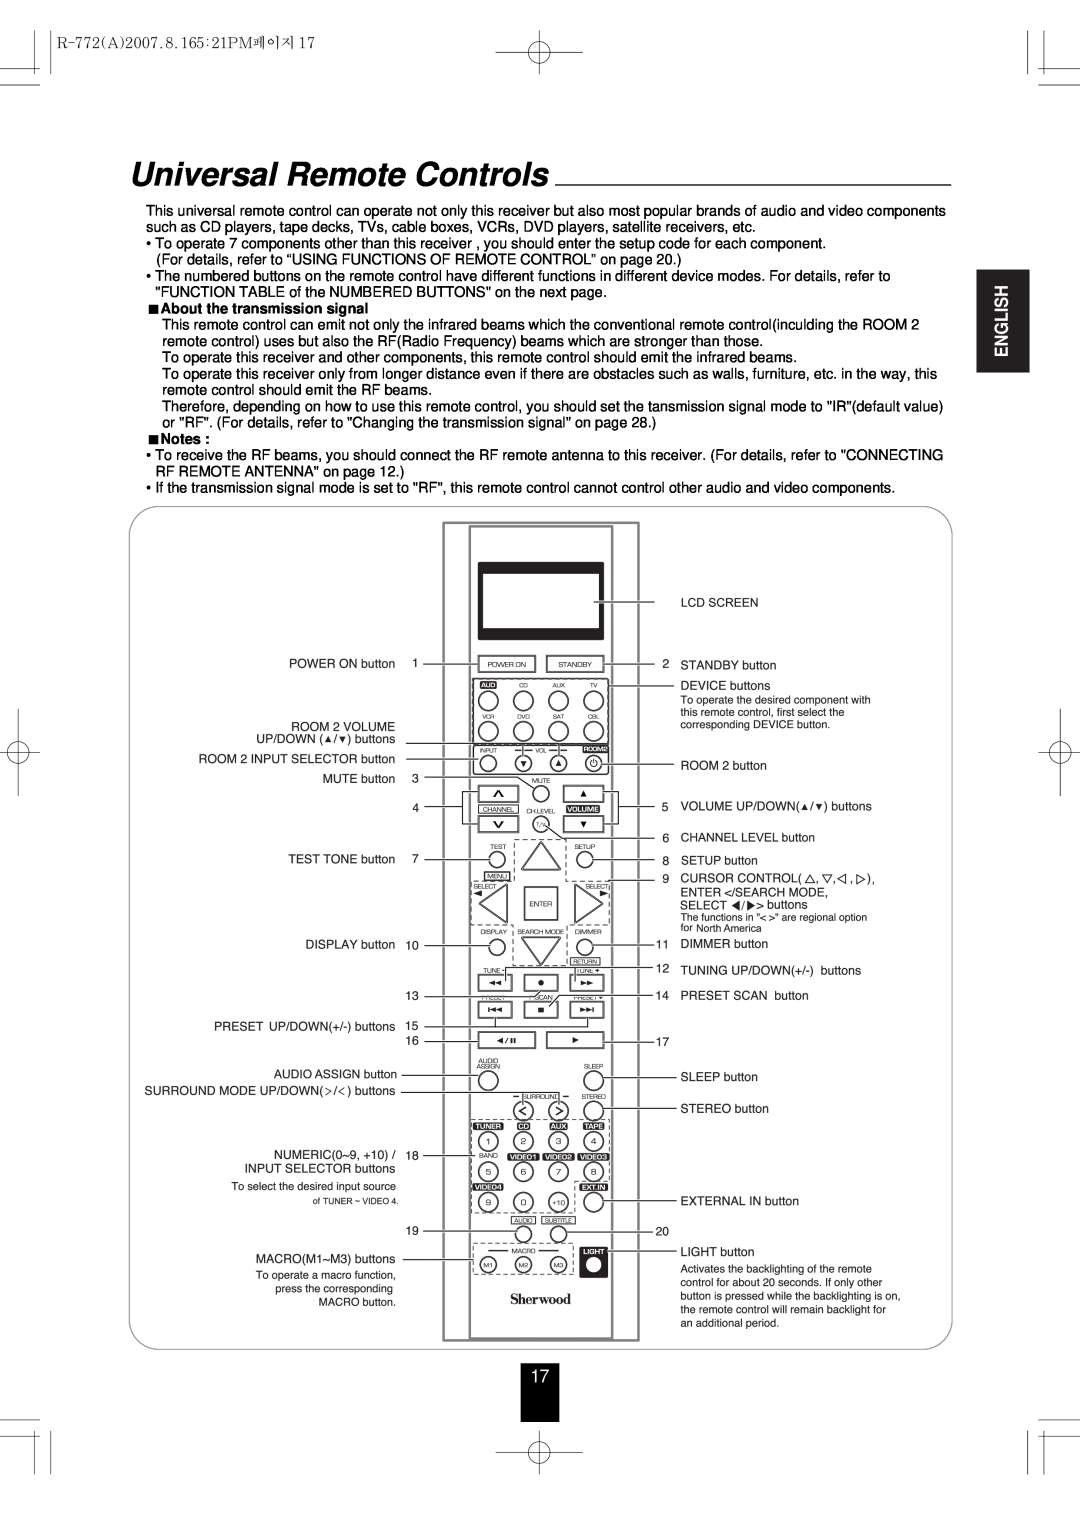 Sherwood R-772 manual Universal Remote Controls, English, About the transmission signal, Notes 